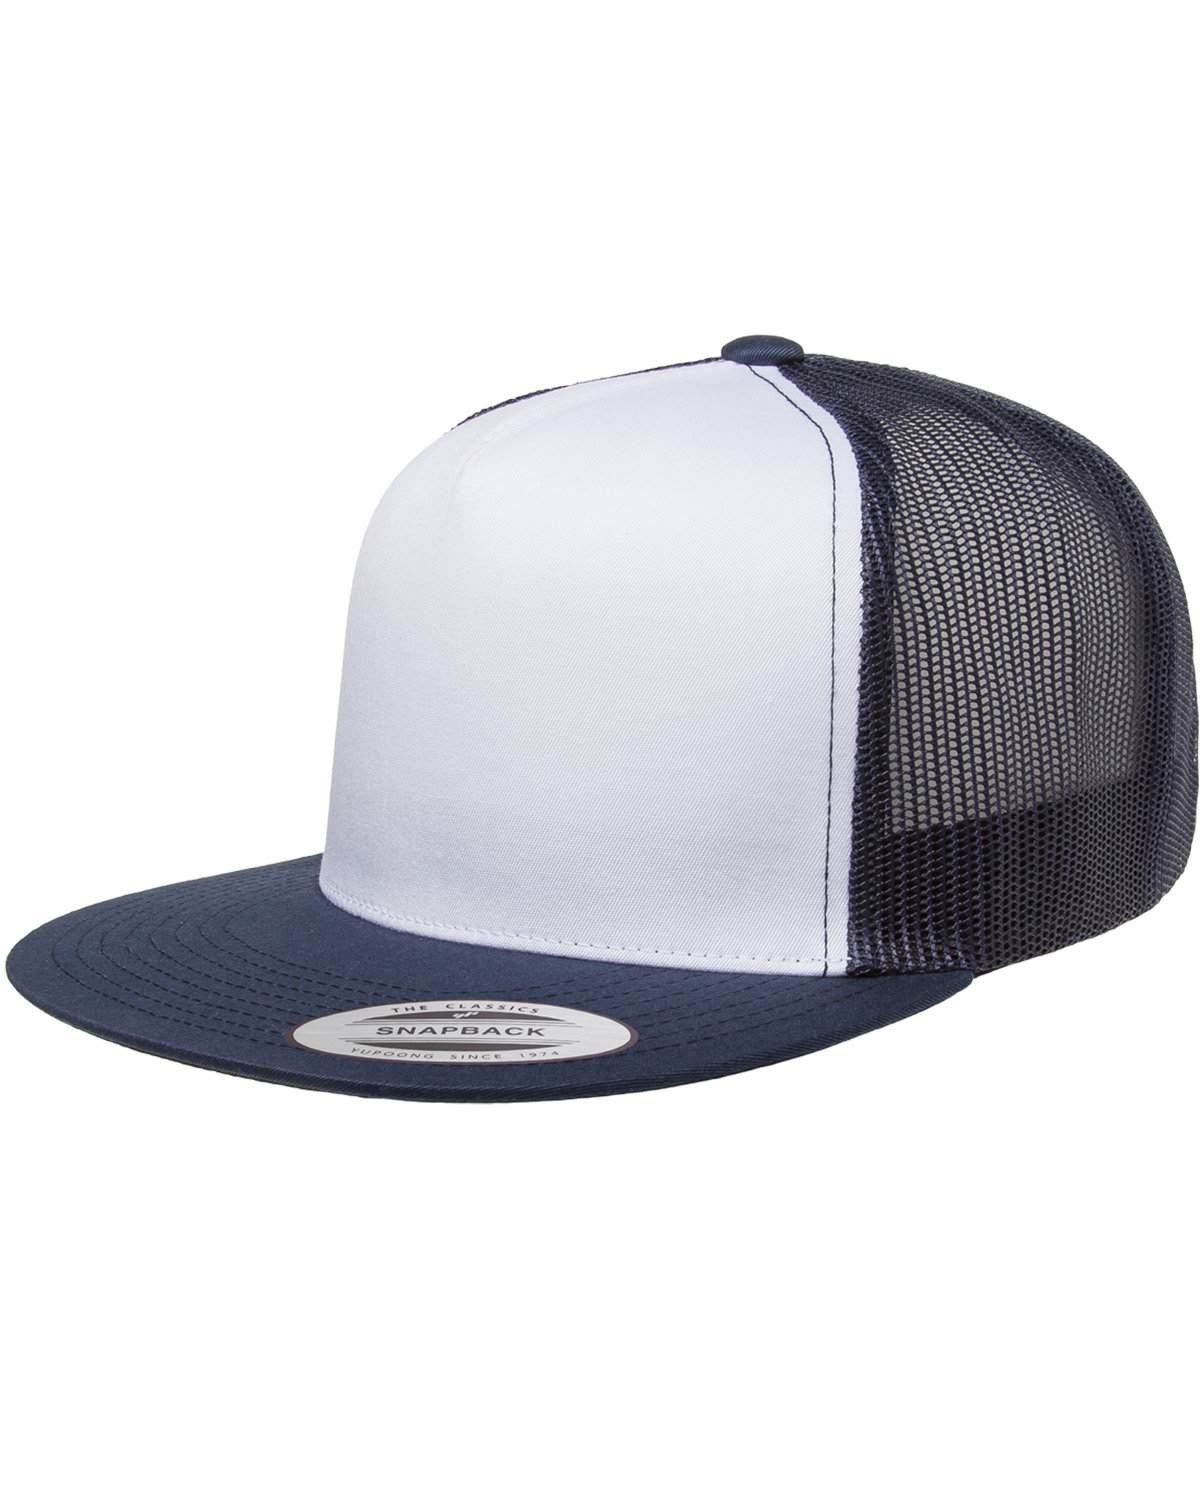 Adult Classic Trucker With White Front Panel Cap-